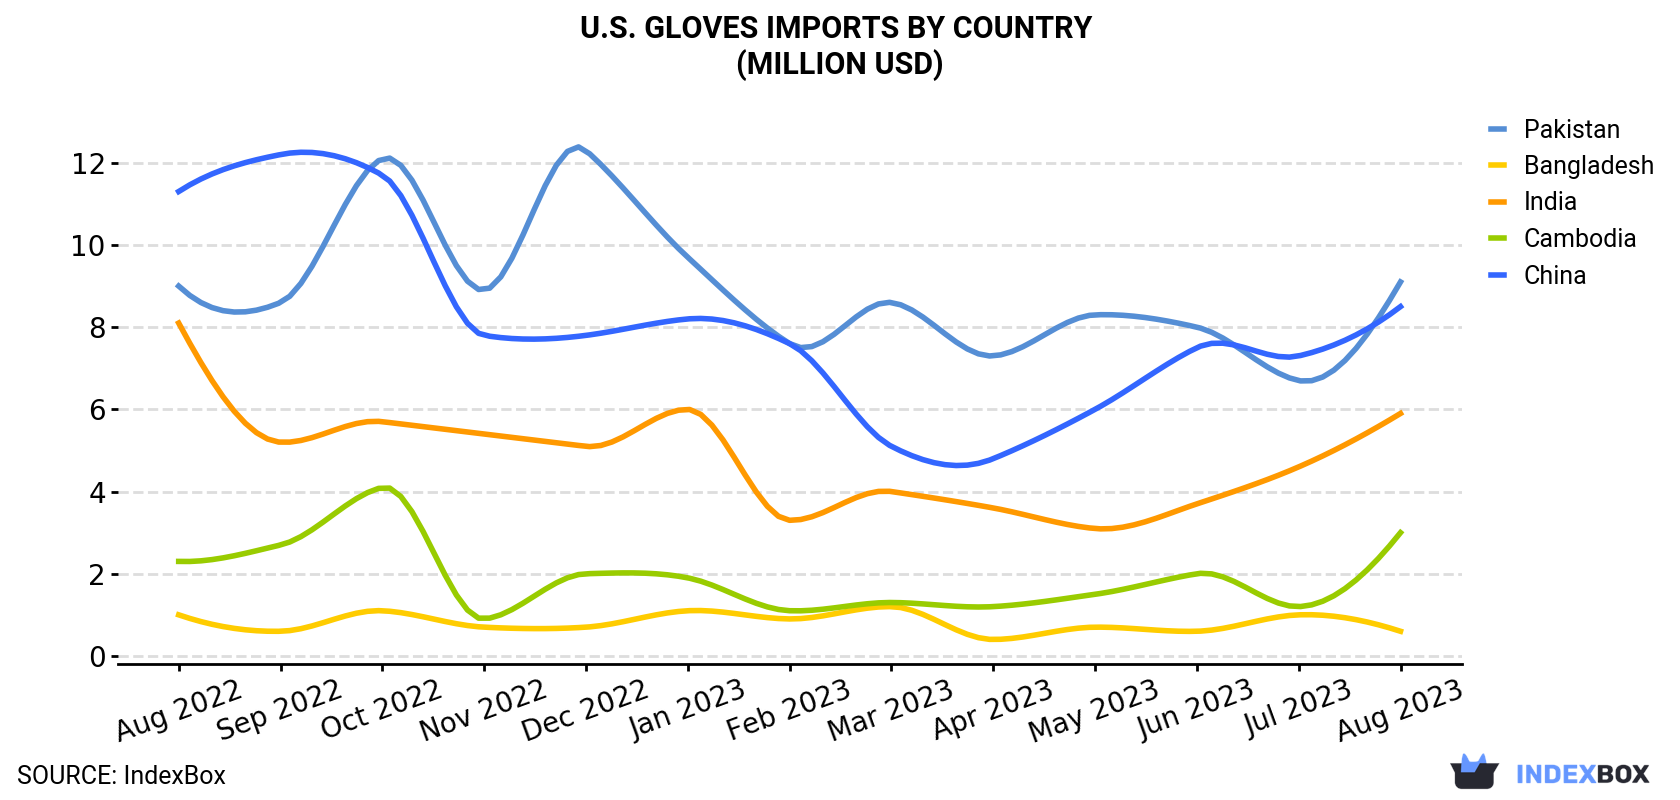 U.S. Gloves Imports By Country (Million USD)